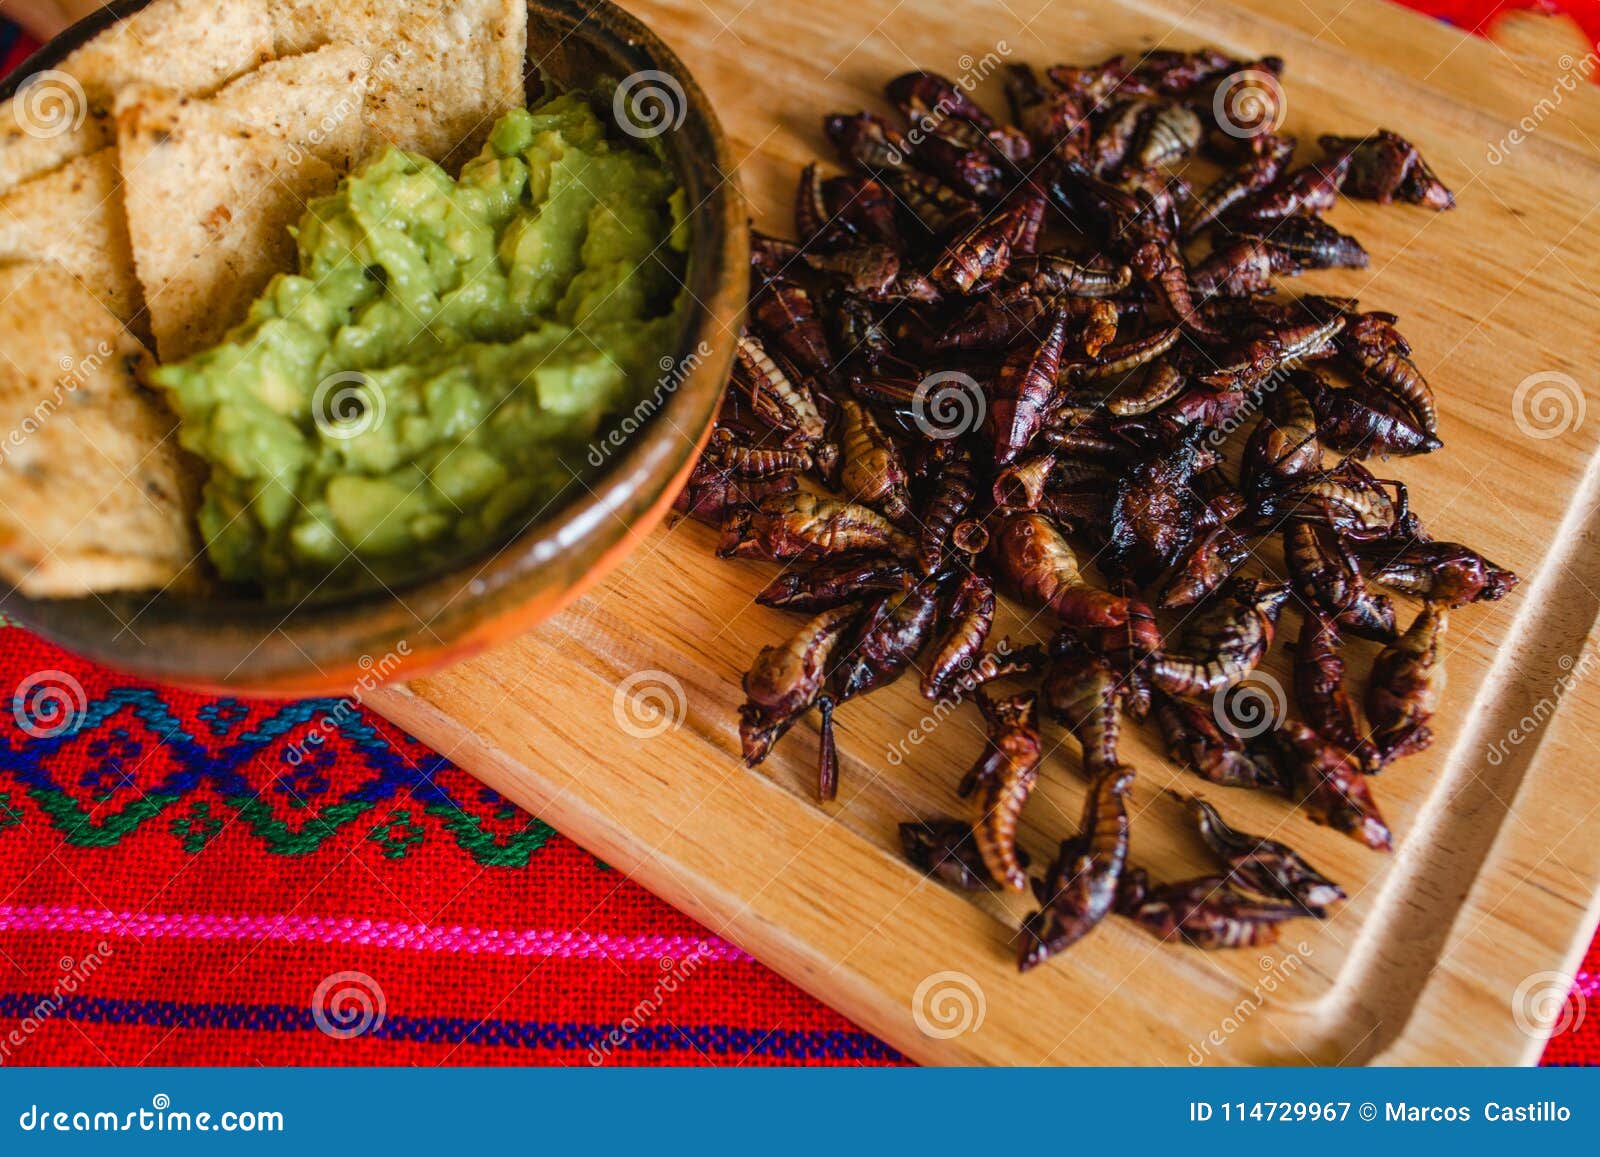 chapulines, grasshoppers snack traditional mexican cuisine from oaxaca mexico